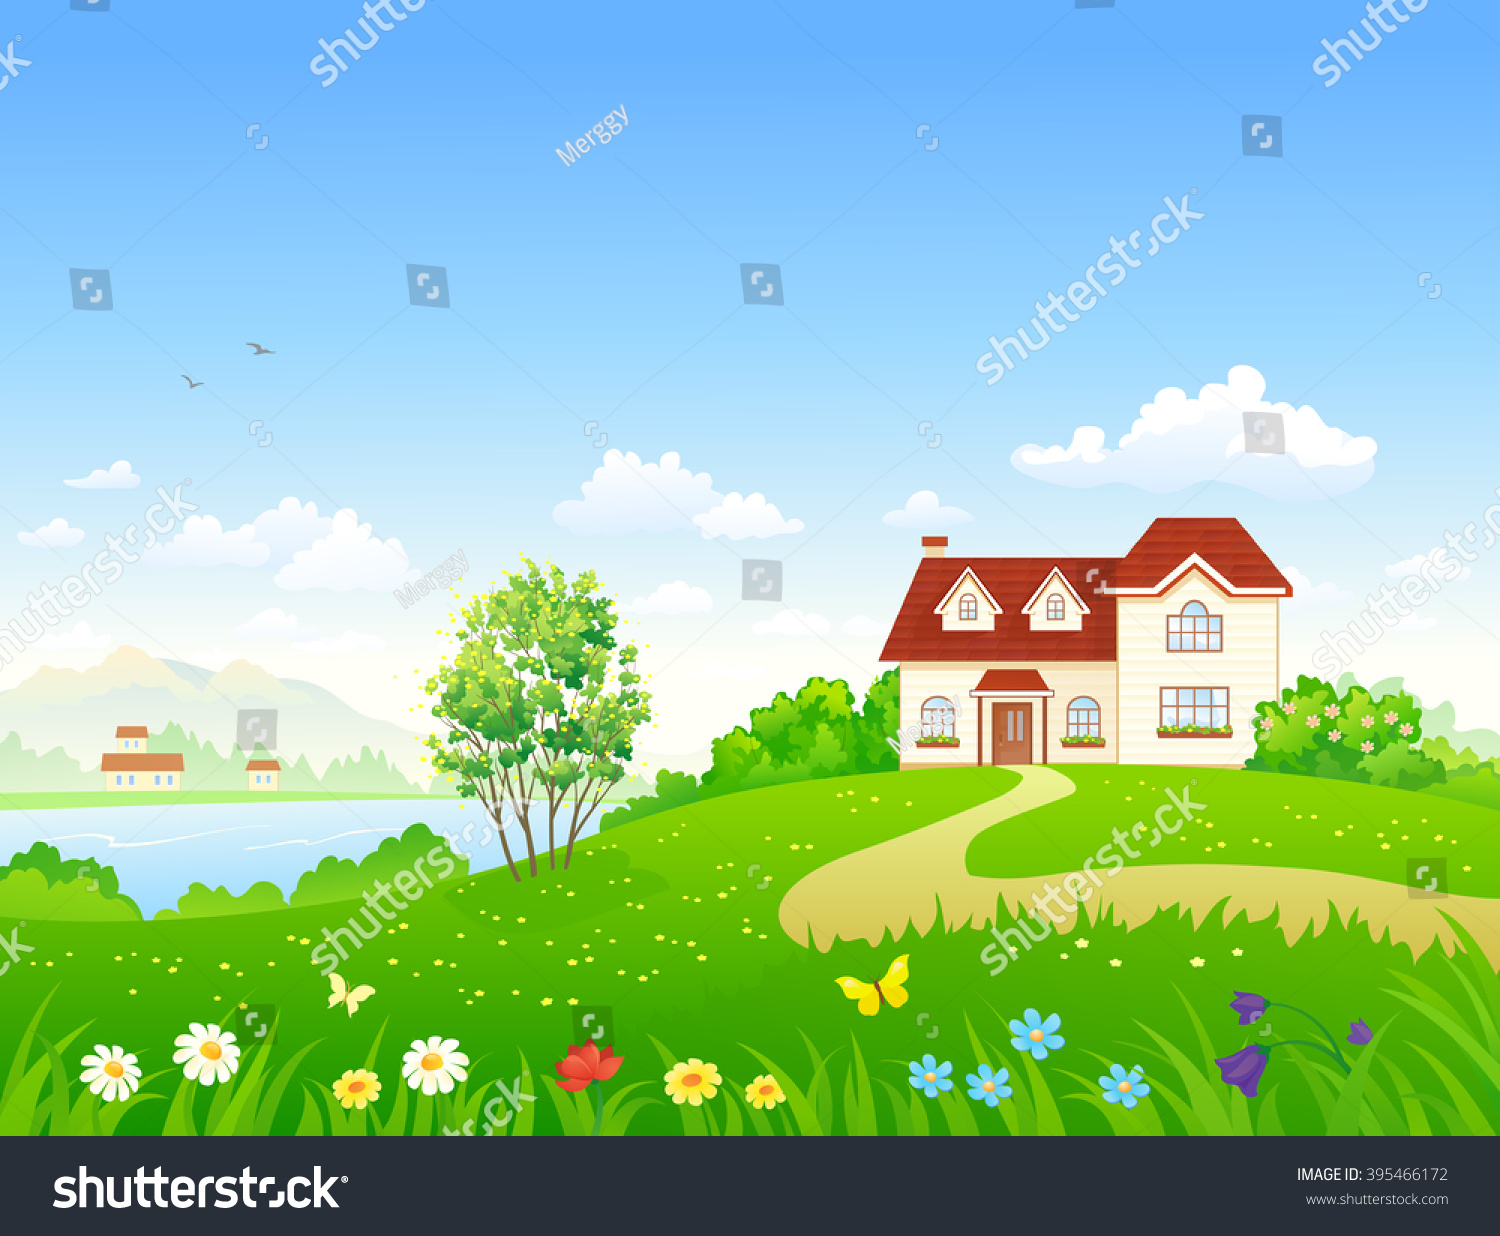 house with garden clipart - photo #50